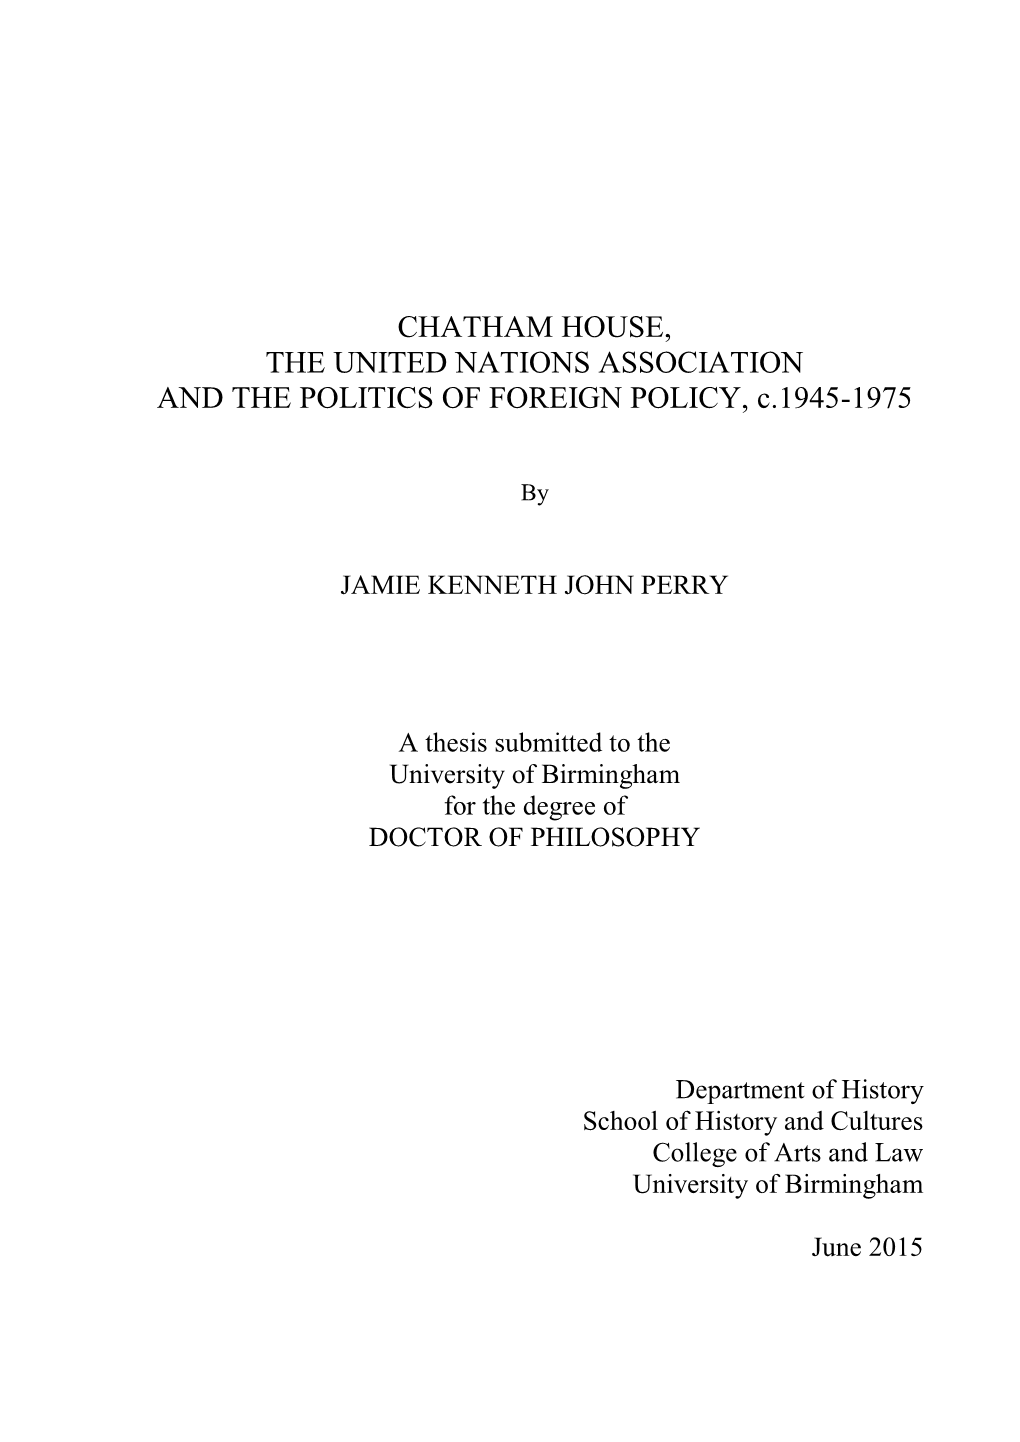 Chatham House, the United Nations Association and the Politics of Foreign Policy, C. 1945-1975